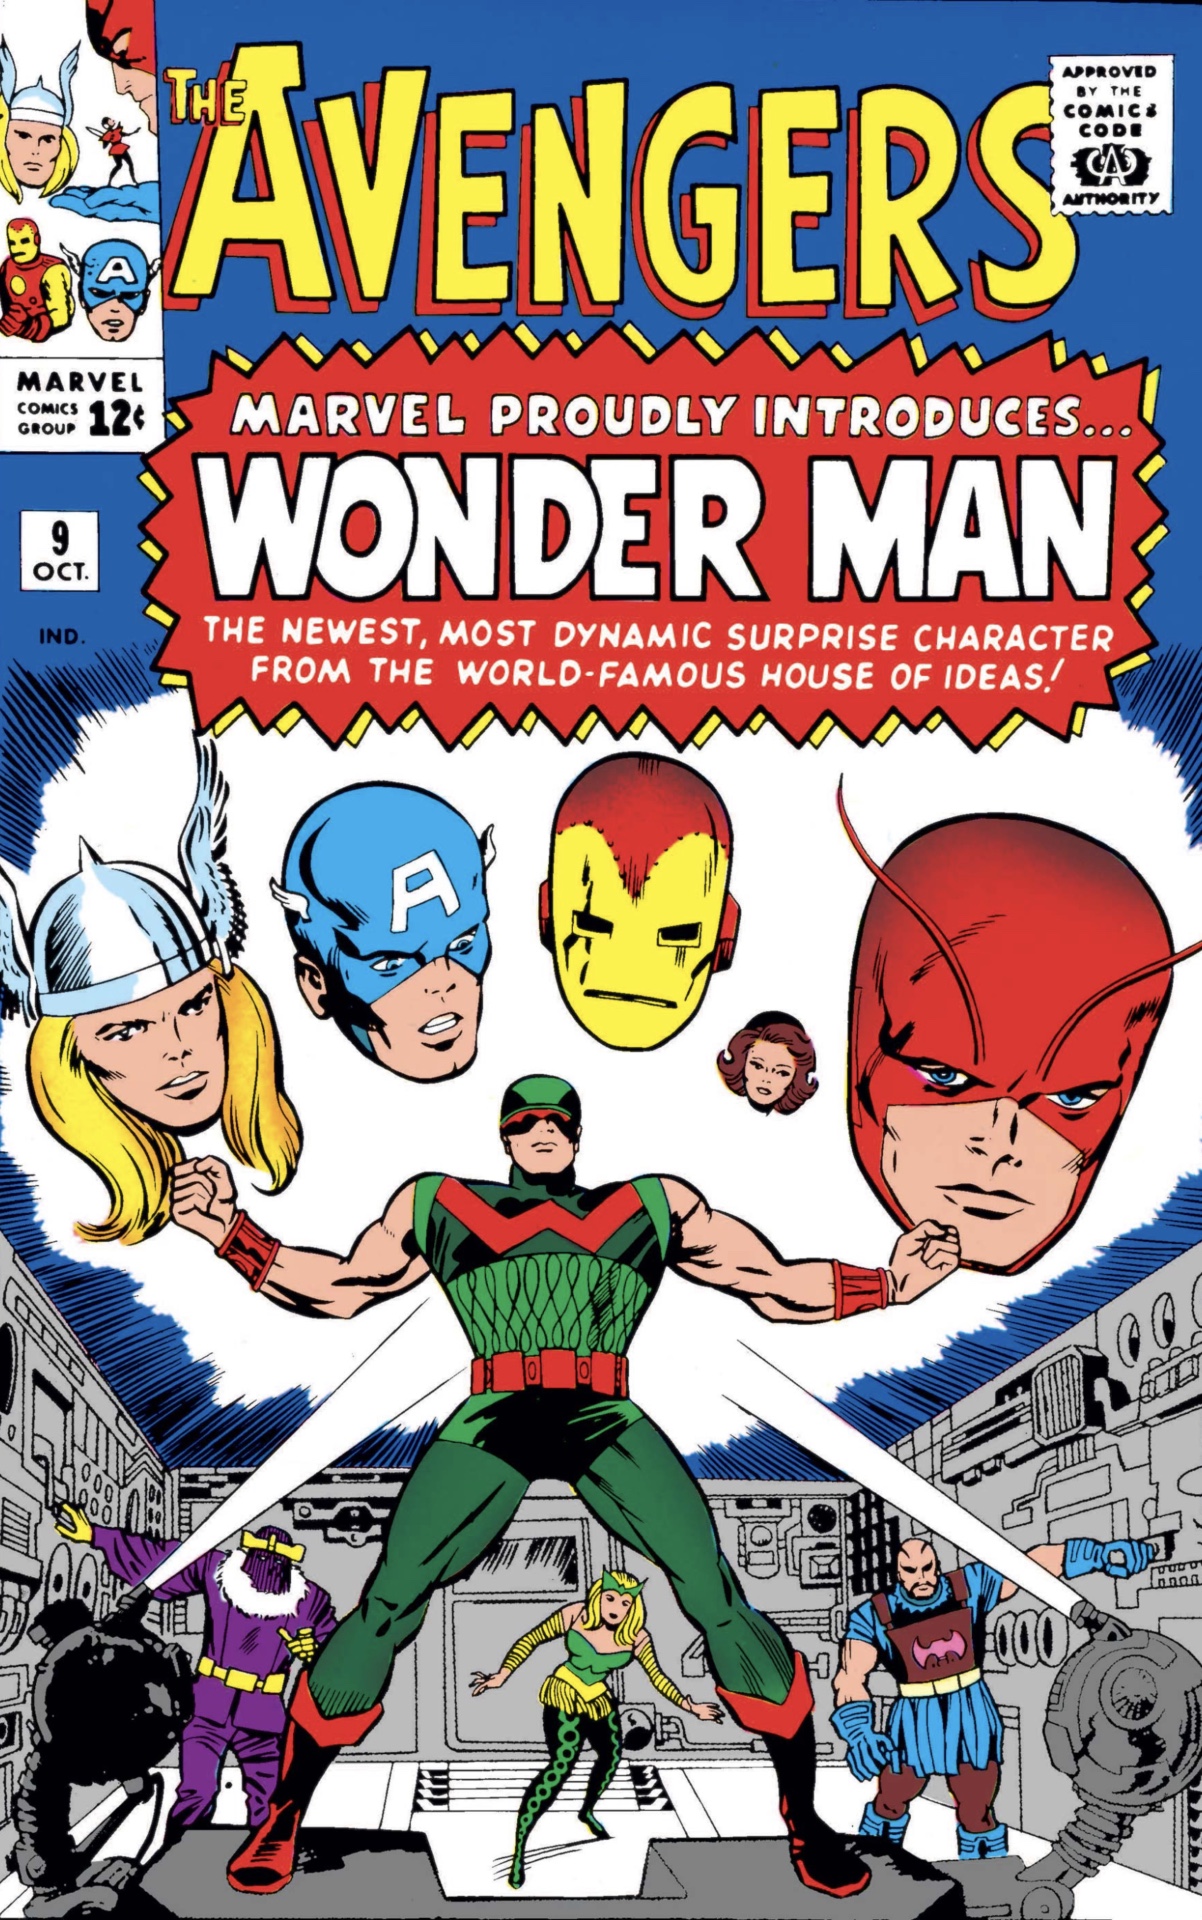 The miracle man in Marvel comics